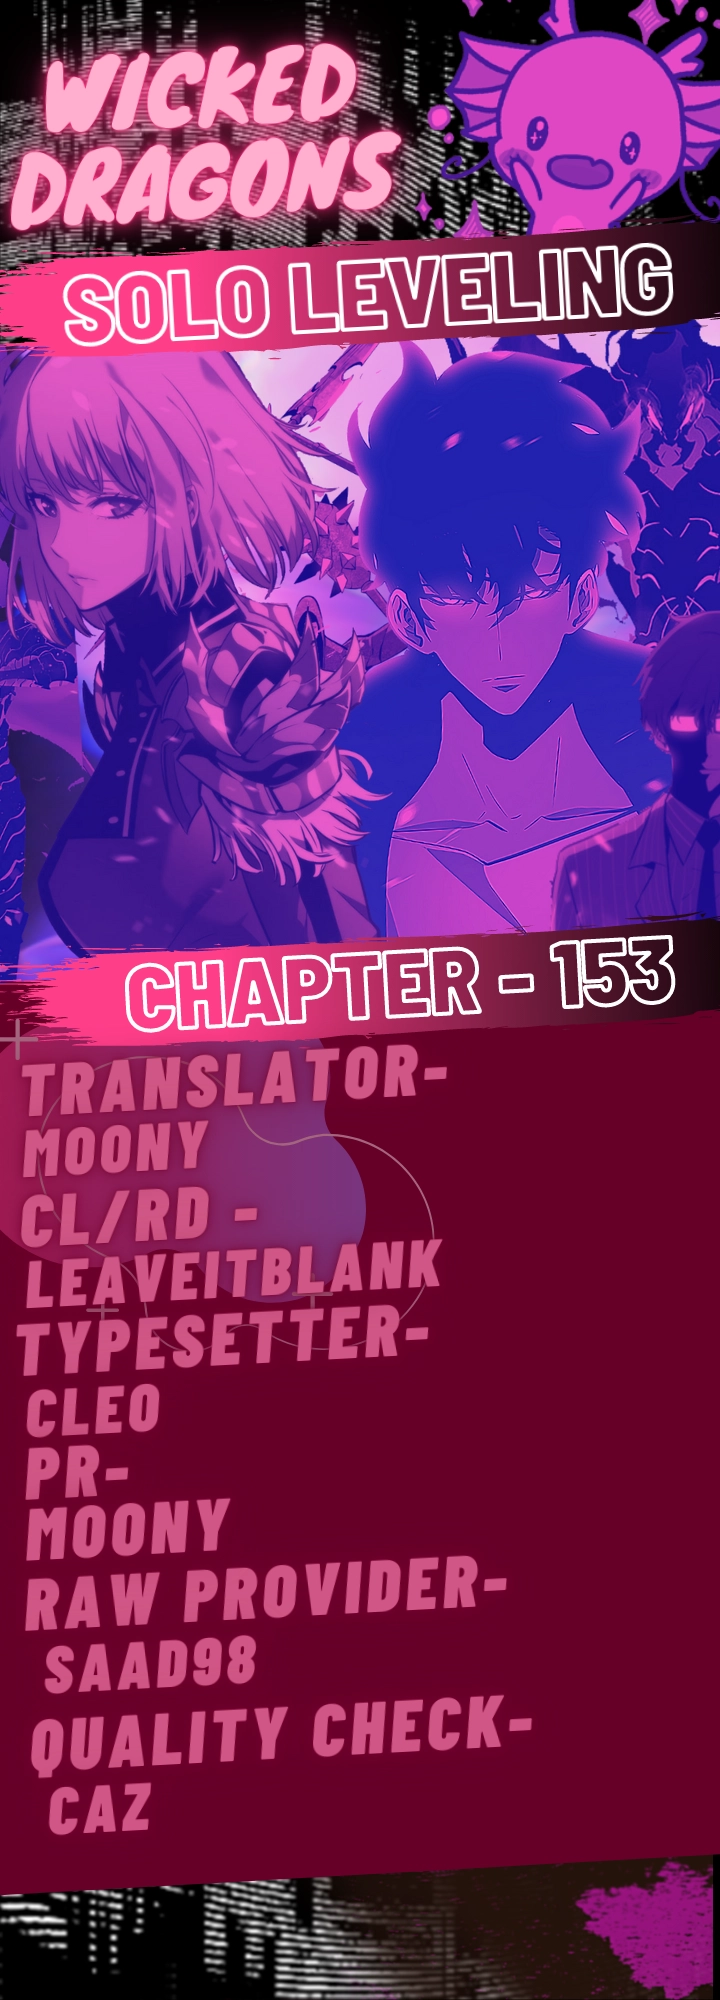 Solo Leveling - Chapter 5619 - Image 1